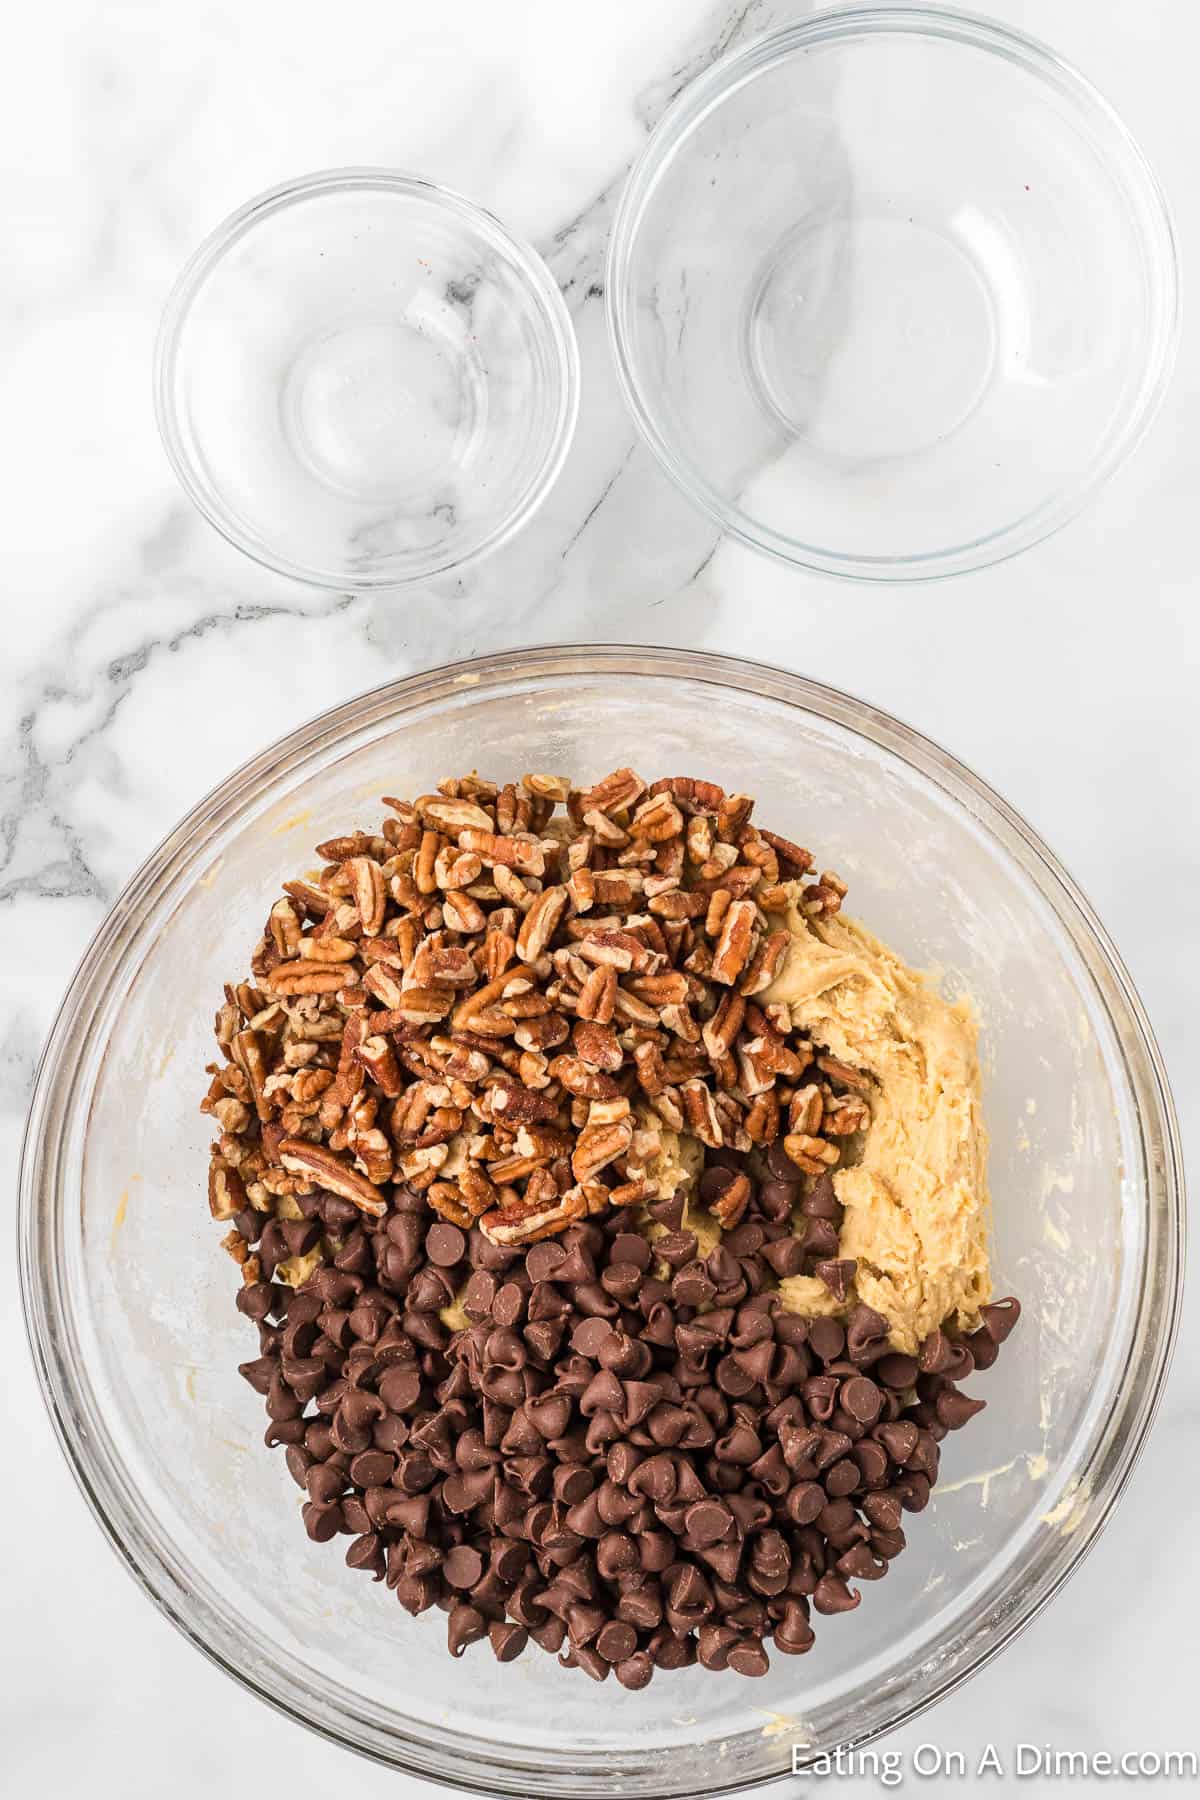 A clear glass bowl filled with cookie dough, chopped pecans, and chocolate chips sits on a marble countertop. Two smaller empty glass bowls are placed beside it. The image is from "Eating On A Dime.com," perfect for those looking to elevate their Chocolate Chip Cookie Cake recipe.